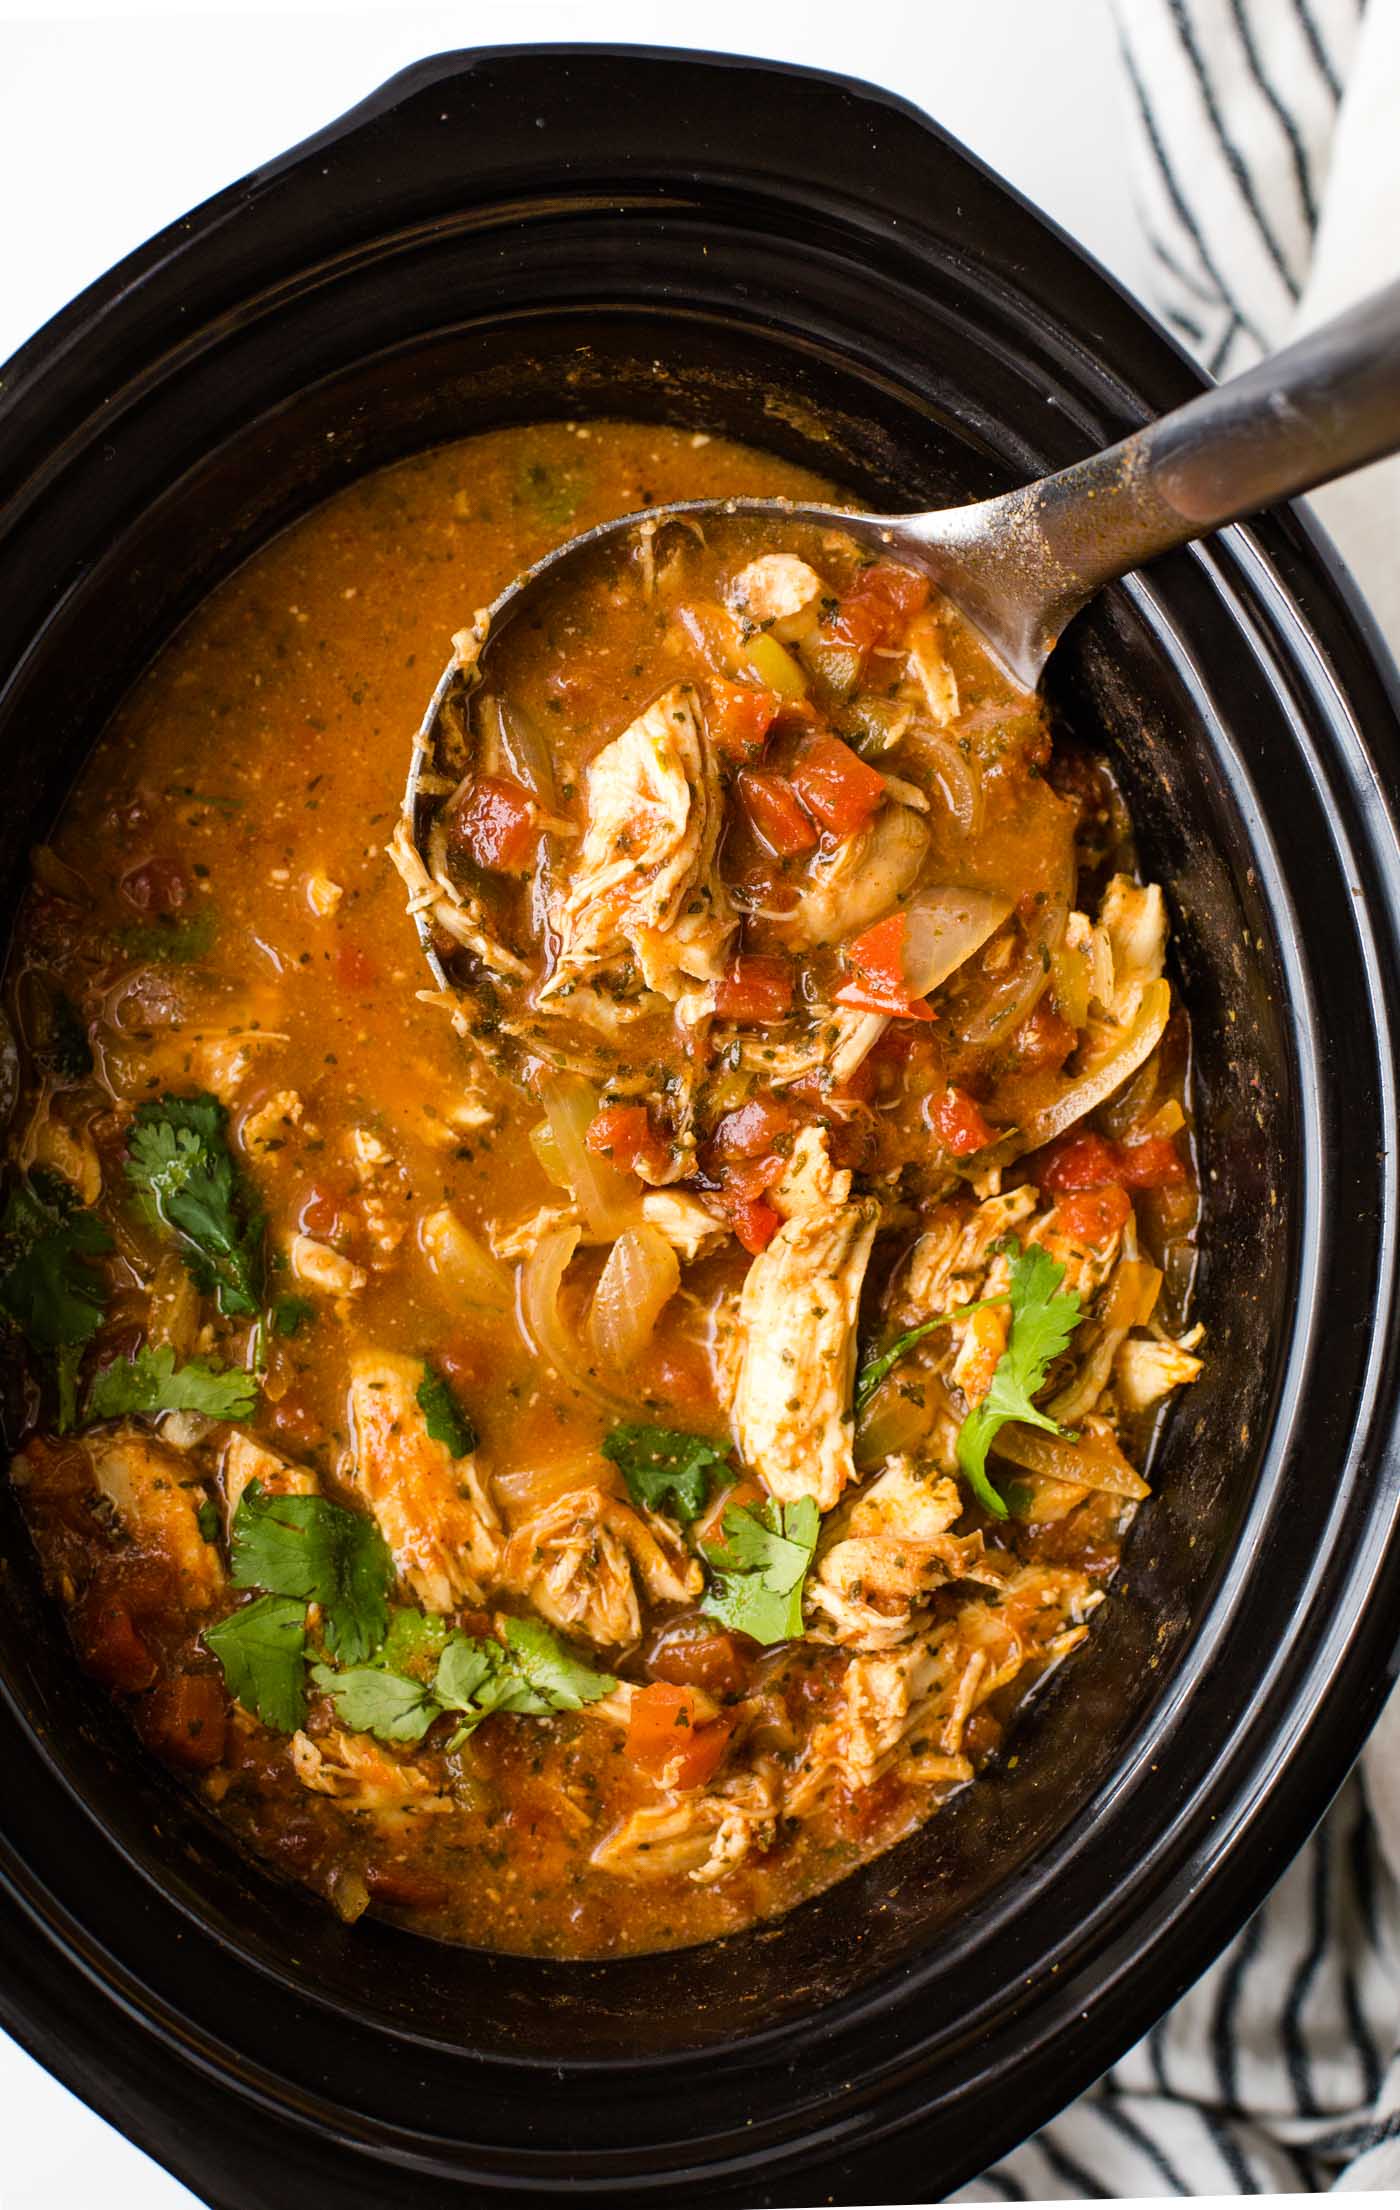 https://thehealthyconsultant.com/wp-content/uploads/2020/03/Chicken-Tortilla-Soup-in-black-crock-pot-with-ladle-1.jpg